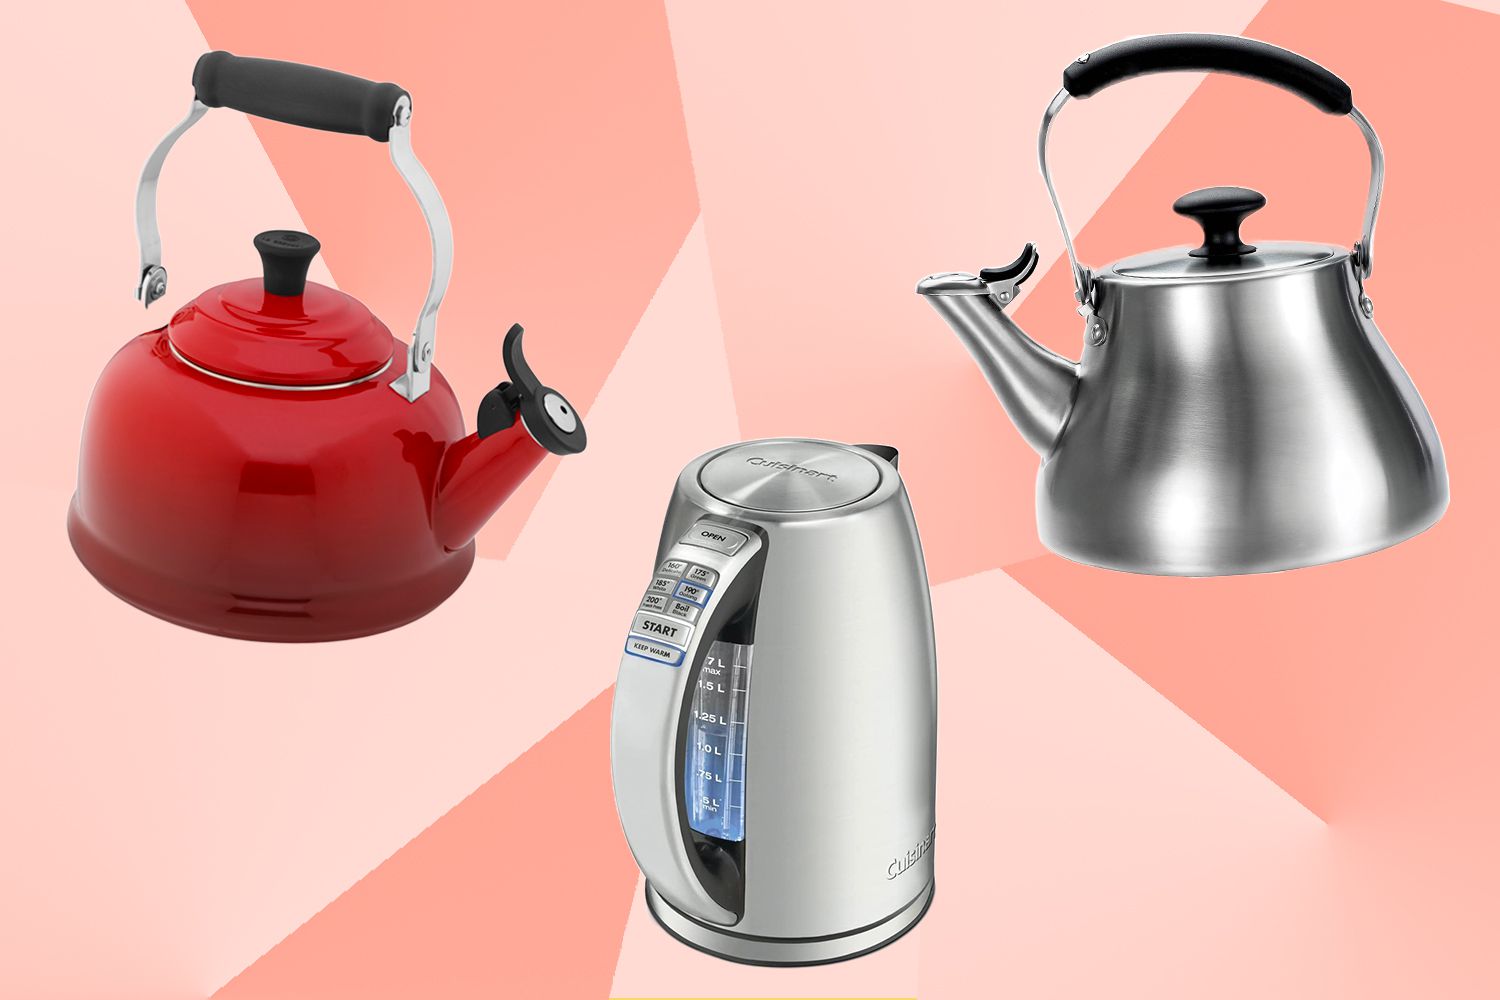 What Is More Efficient: Stovetop Kettle Or Electric Kettle